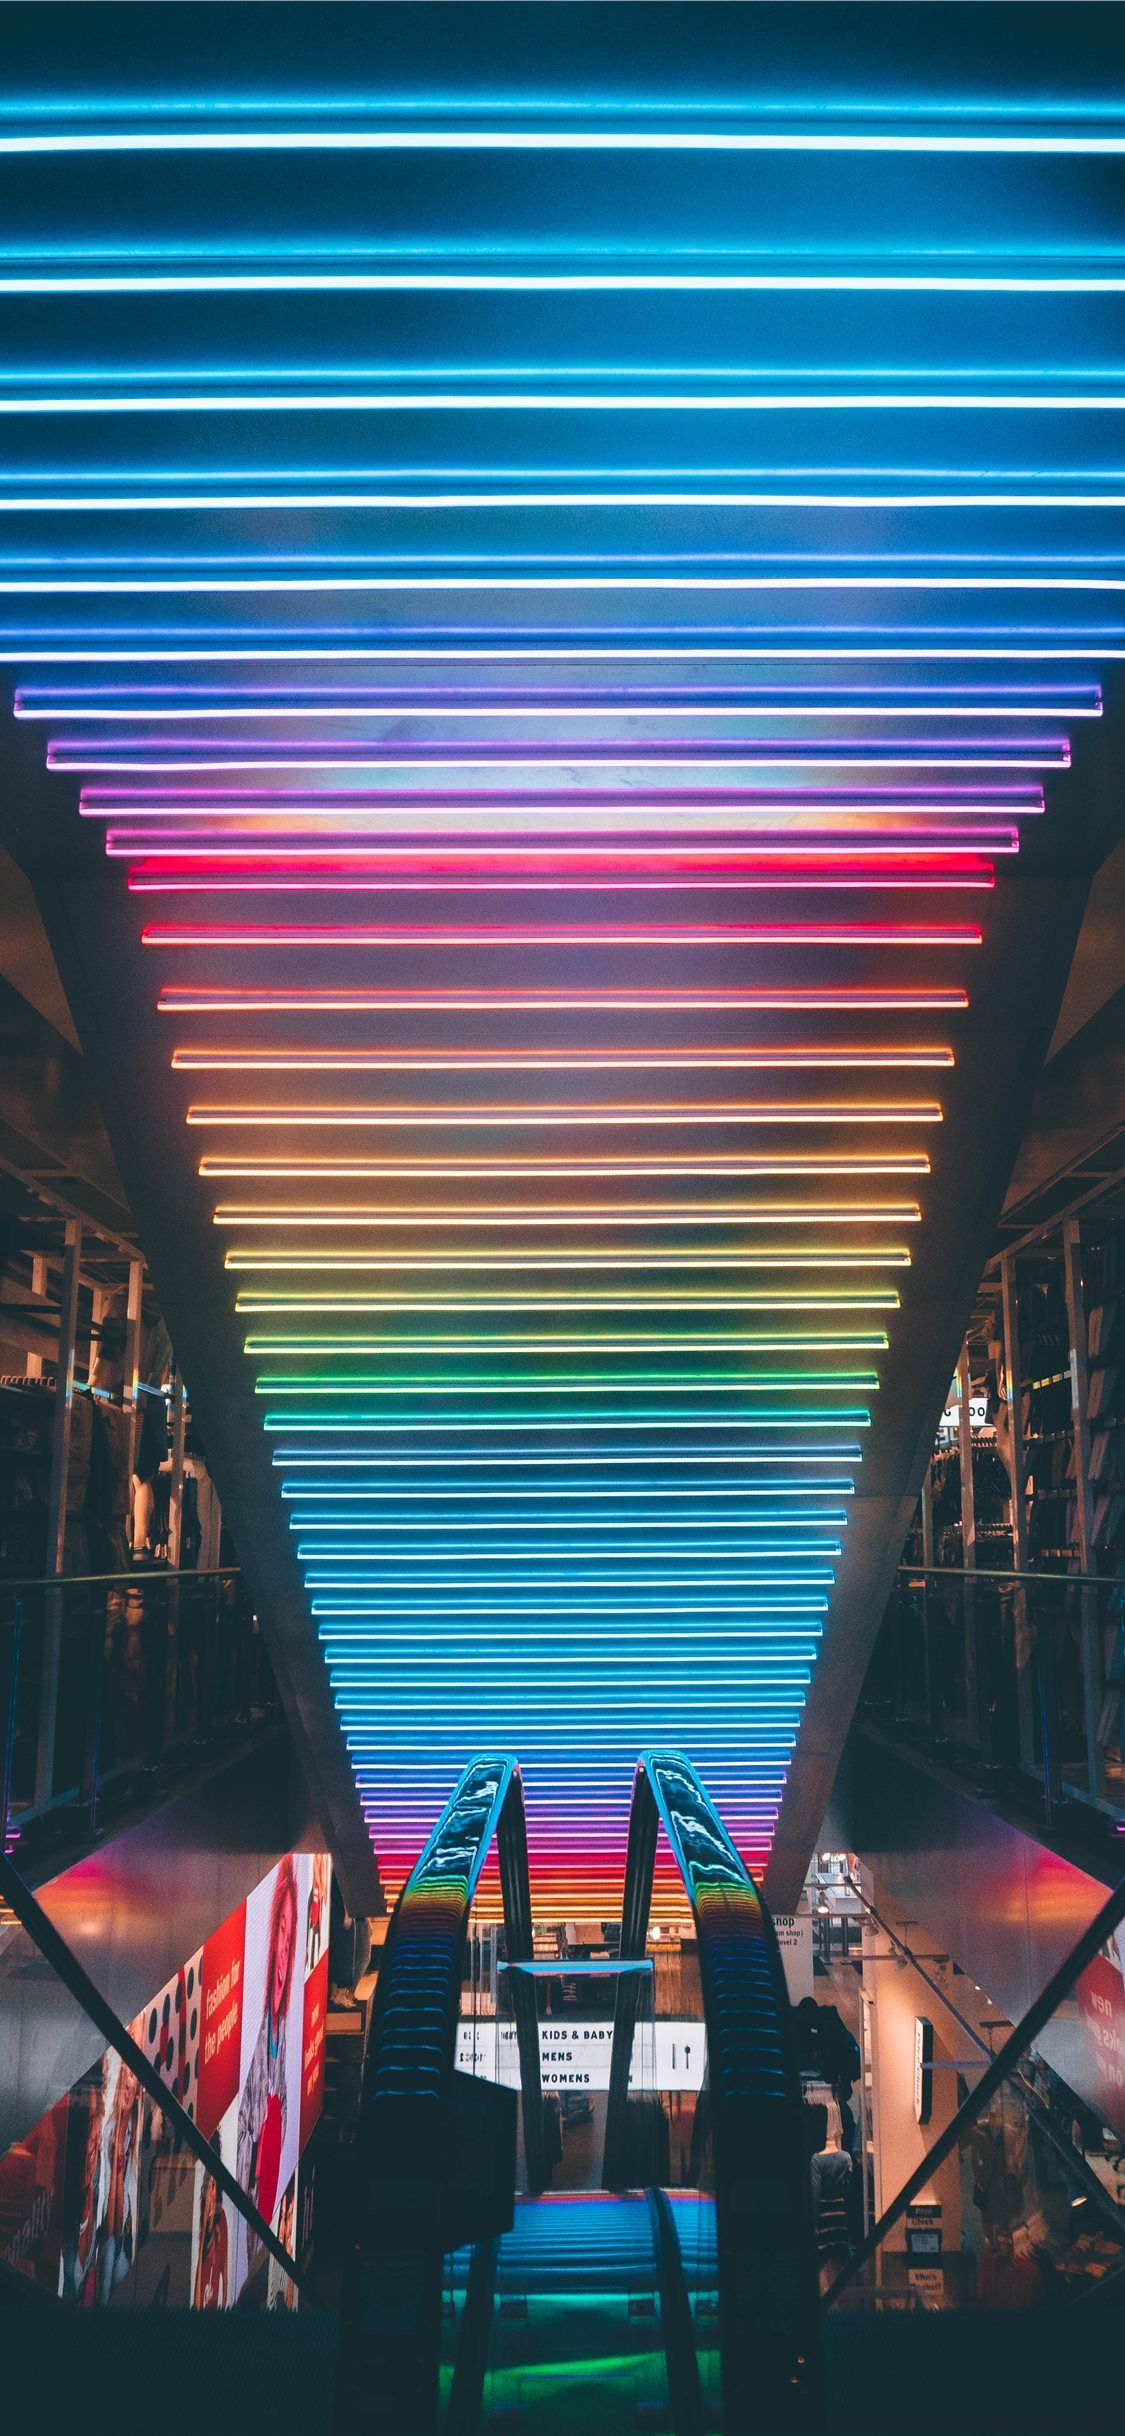 A long escalator with a rainbow of lights above it - Architecture